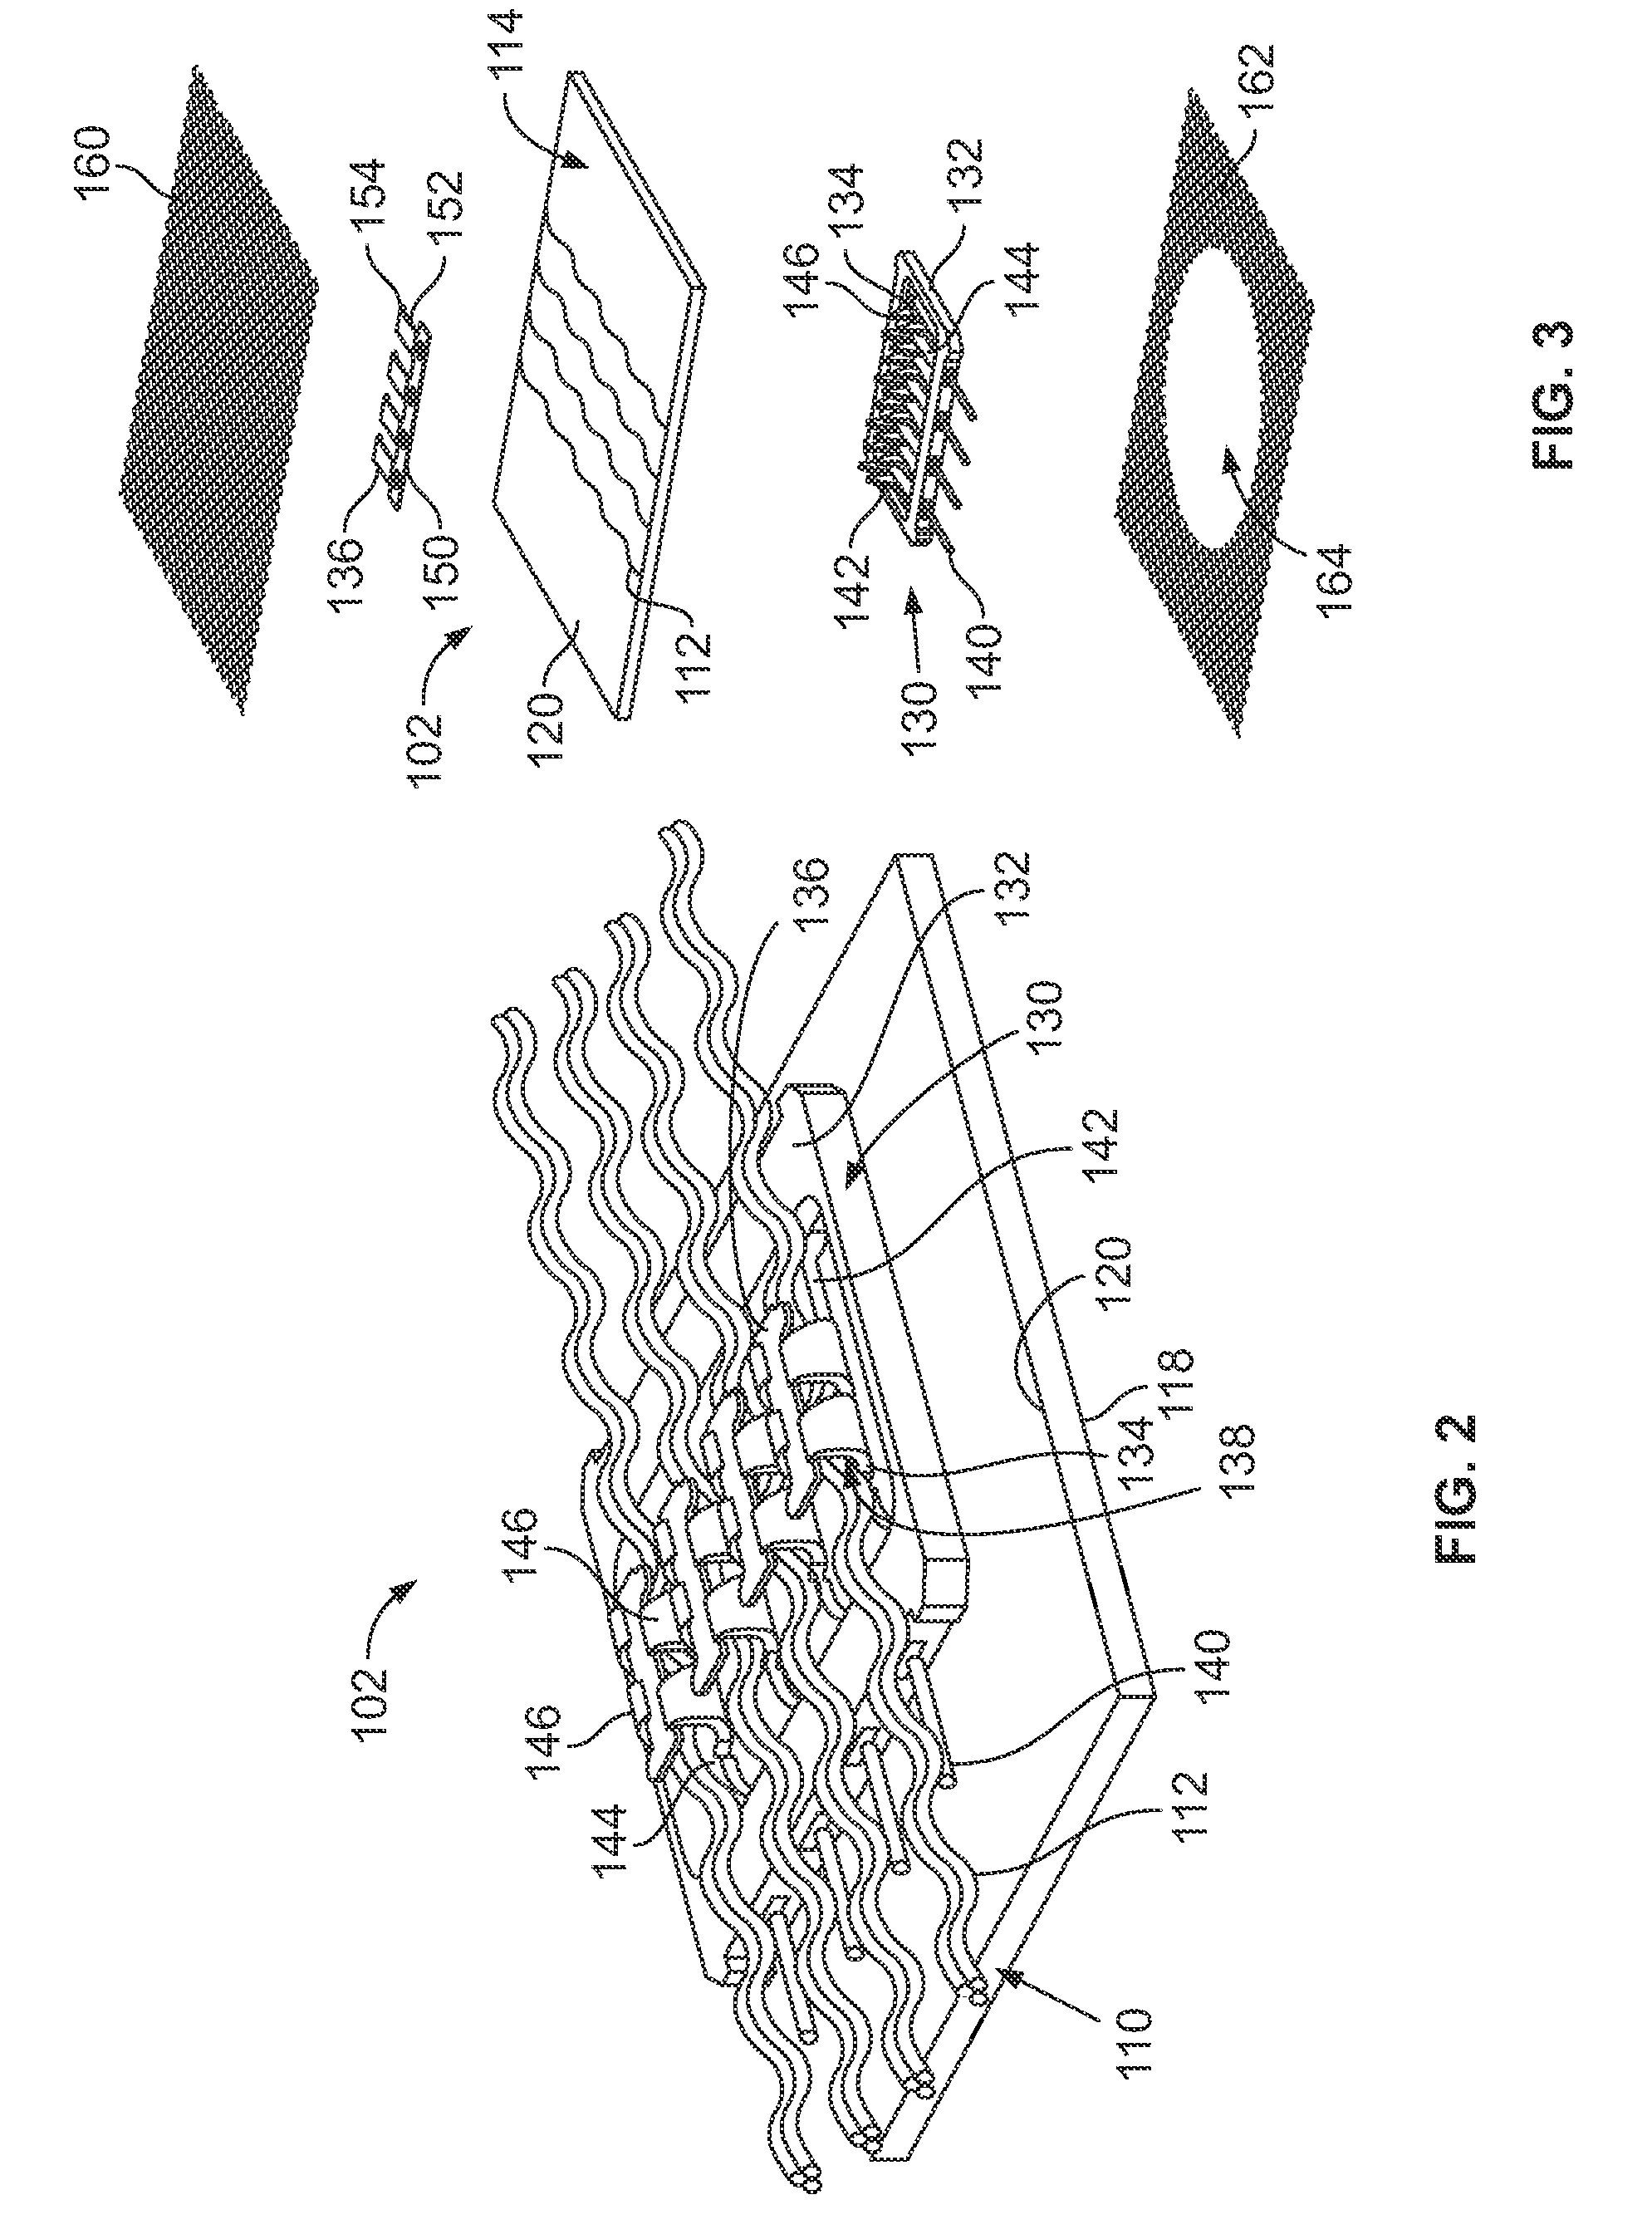 Interconnect and termination methodology for e-textiles